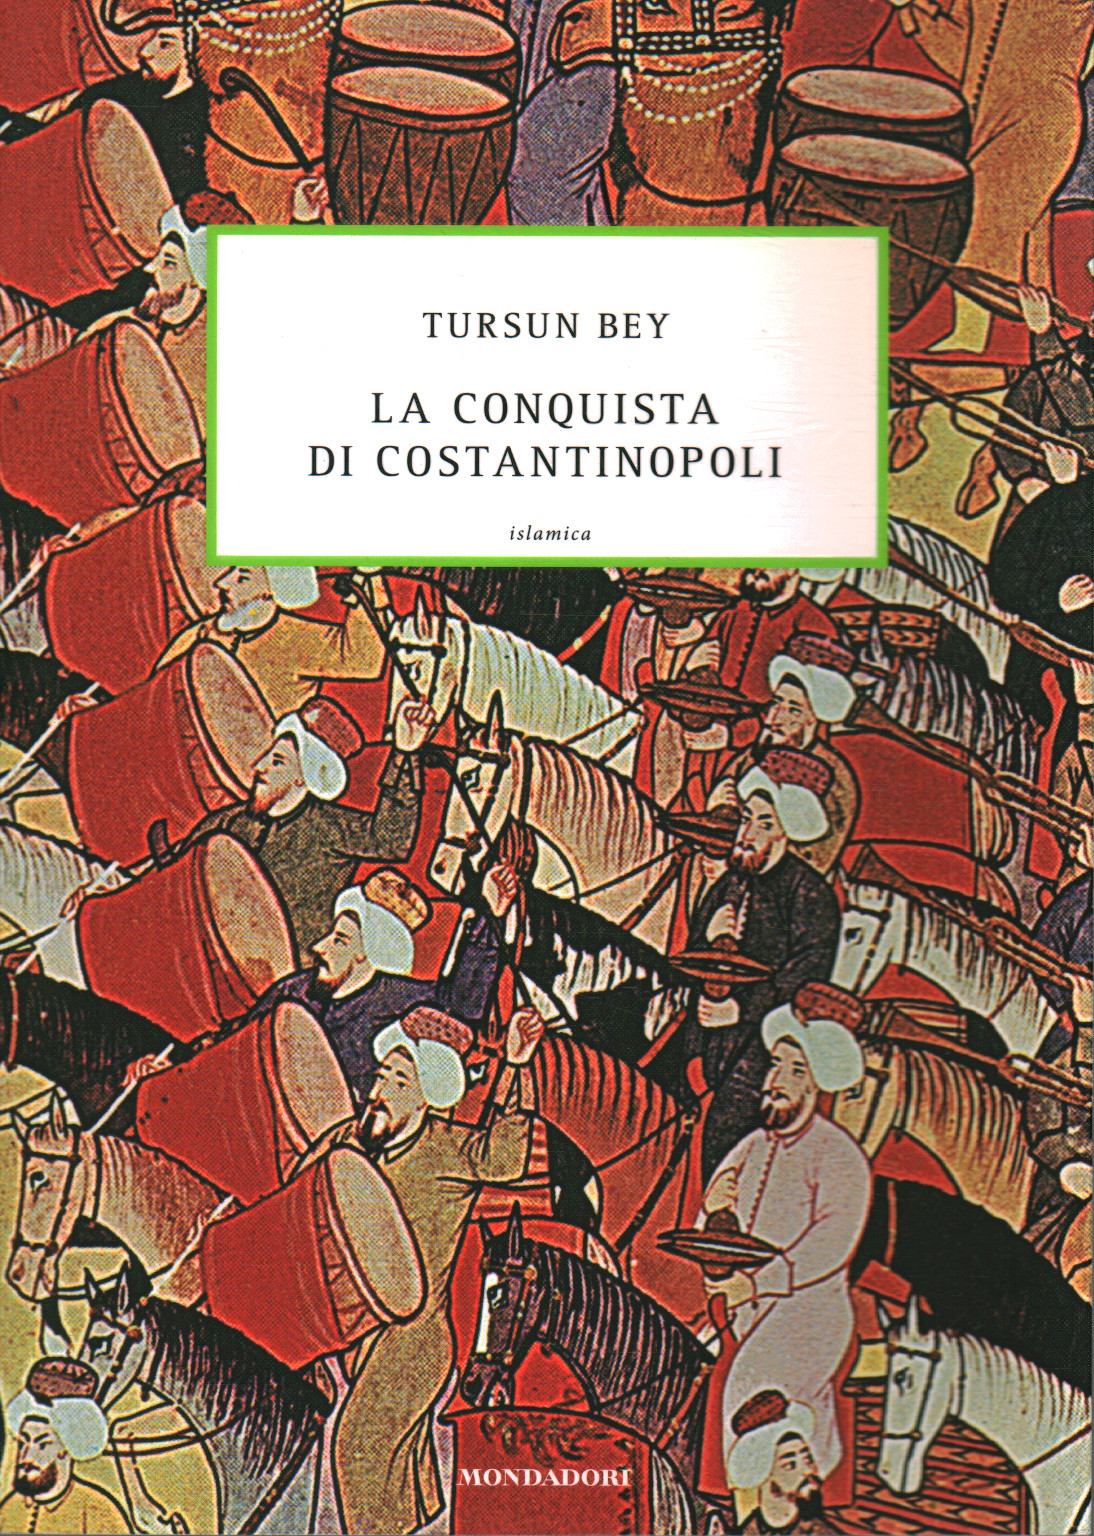 The conquest of Constantinople